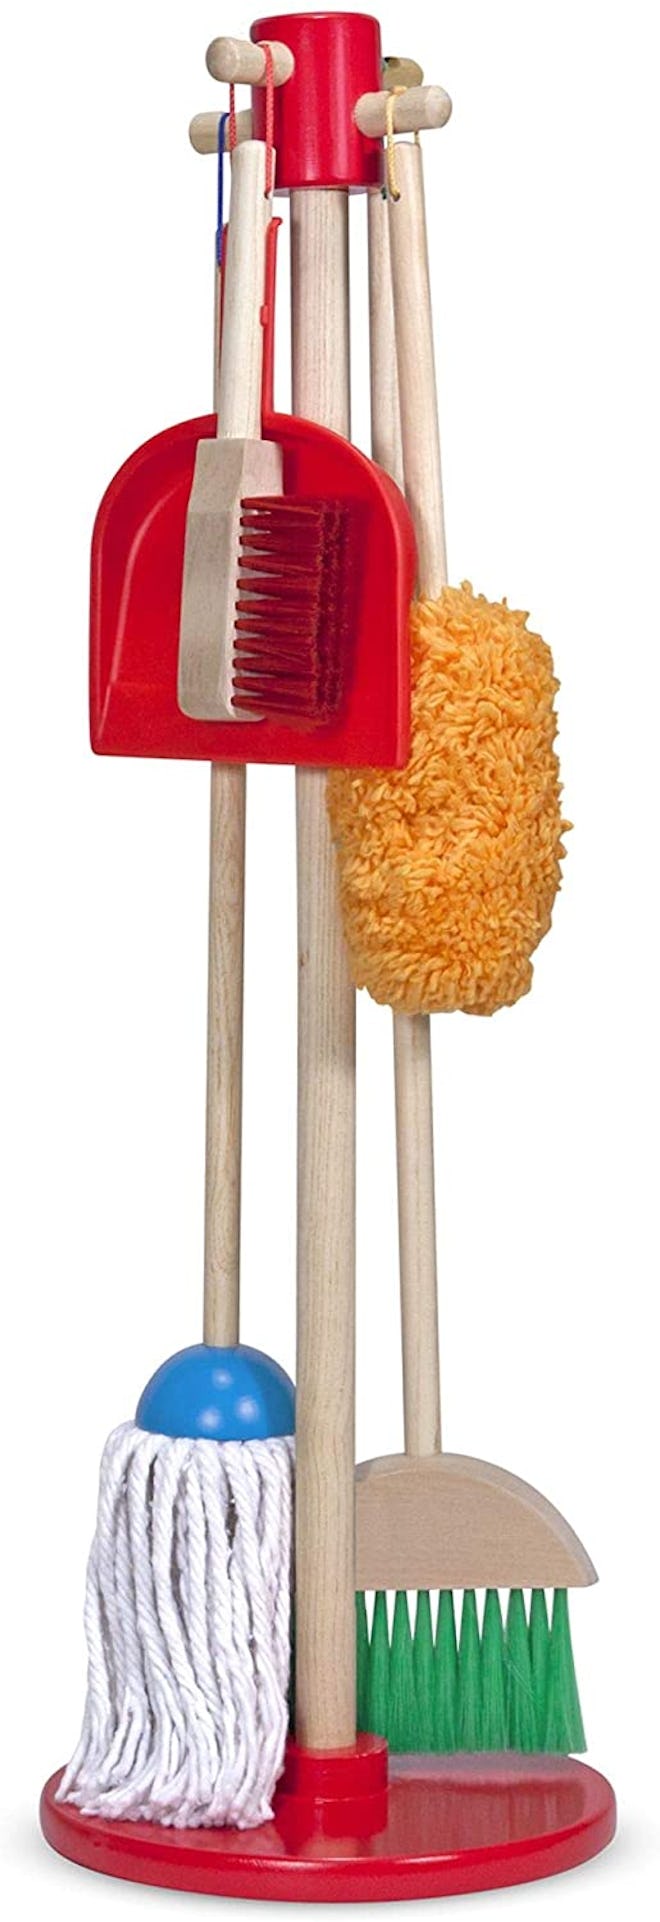 Product image for Melissa & Doug Dust, Sweep, Mop; best gifts for 3-year-olds